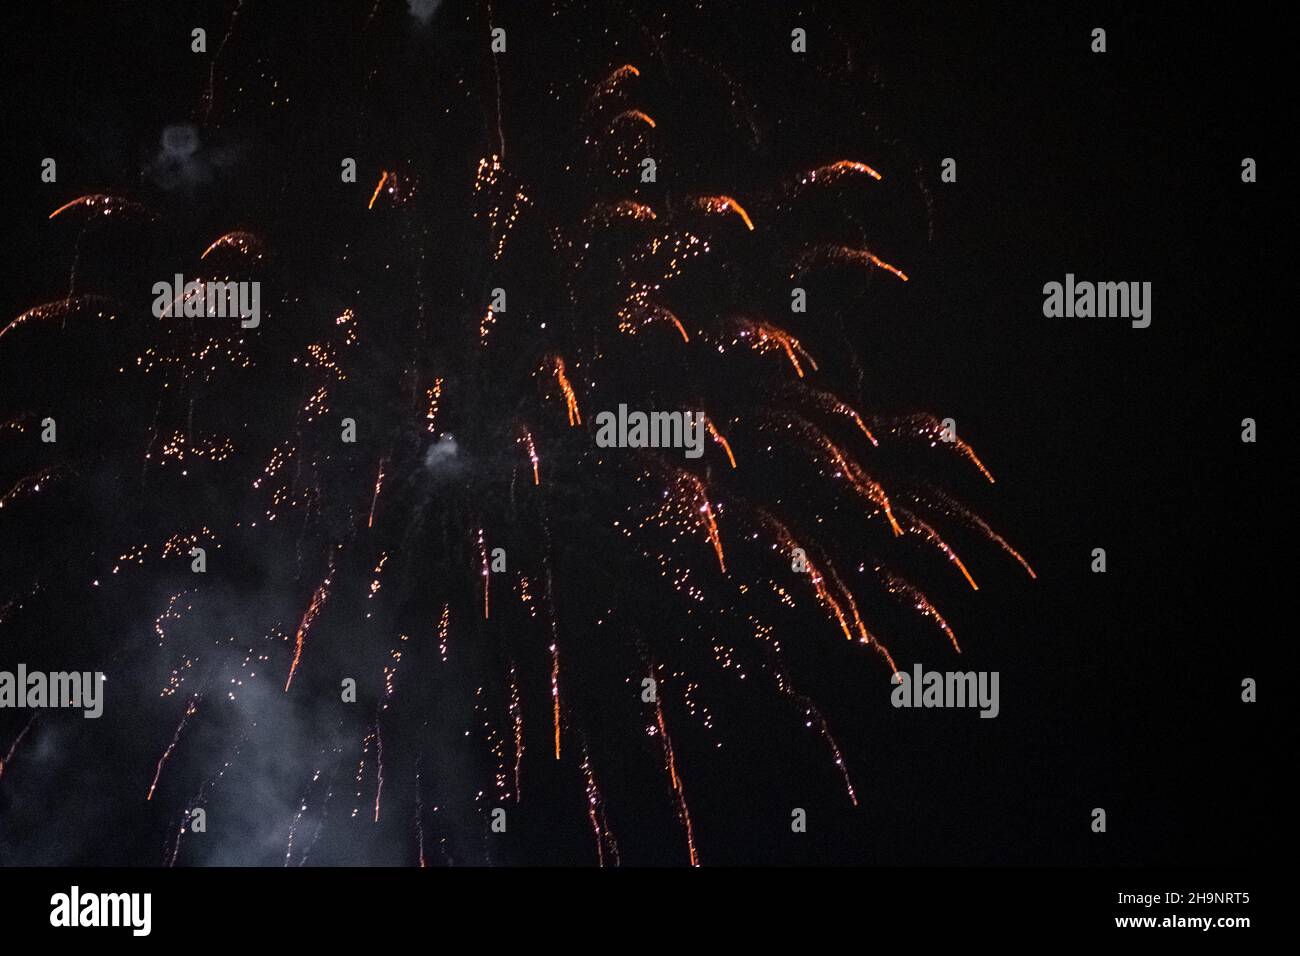 fireworks and salute lights on the background of the black sky. Christmas fireworks in the night sky. New Year celebration Stock Photo